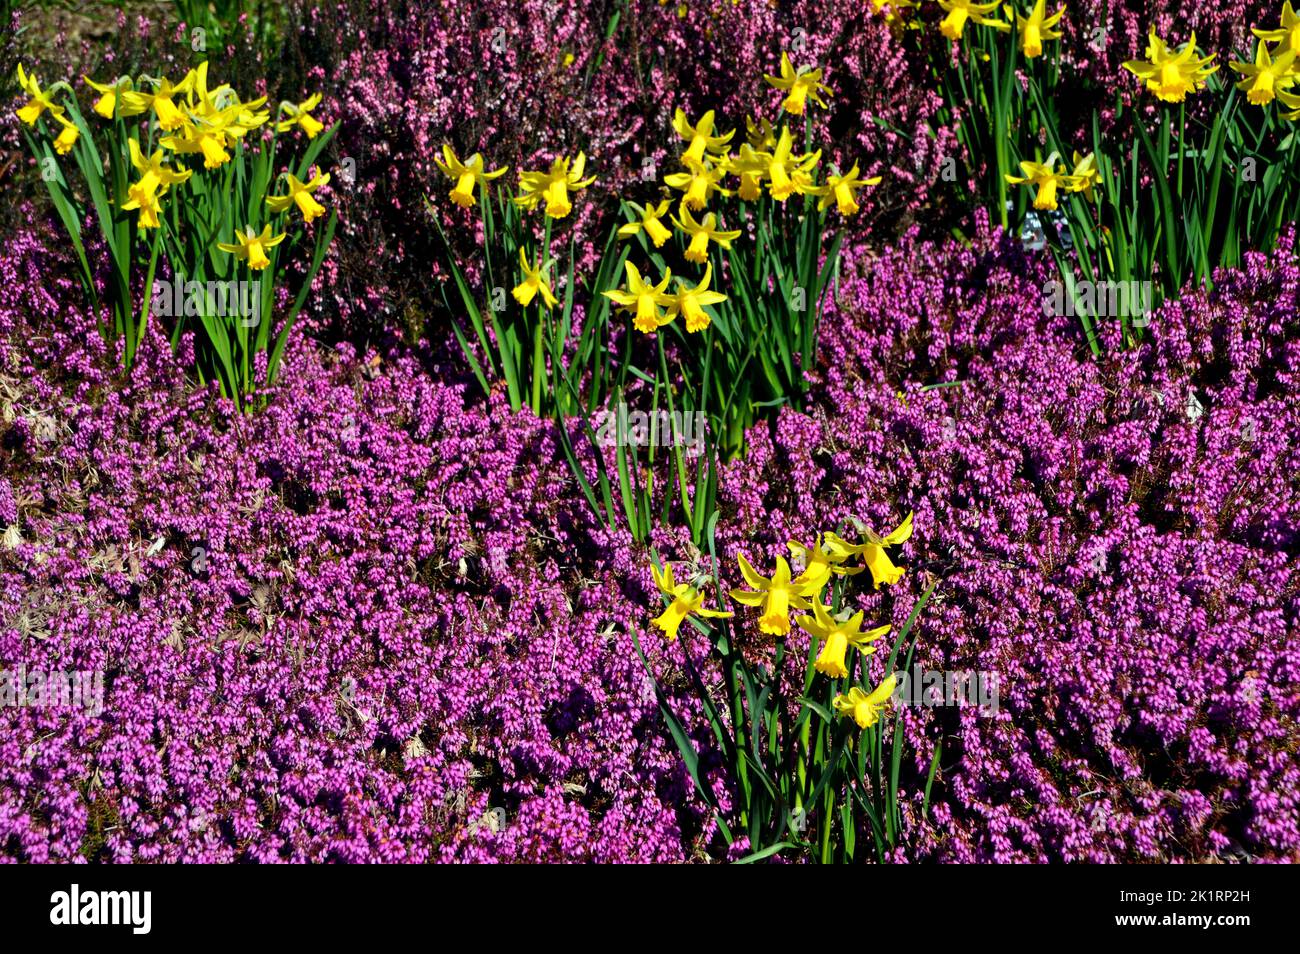 Purple Erica Carnea (Heather) & Bunches of Yellow Daffodils in a Border at RHS Harlow Carr, Harrogate, Yorkshire, England, UK. Stock Photo